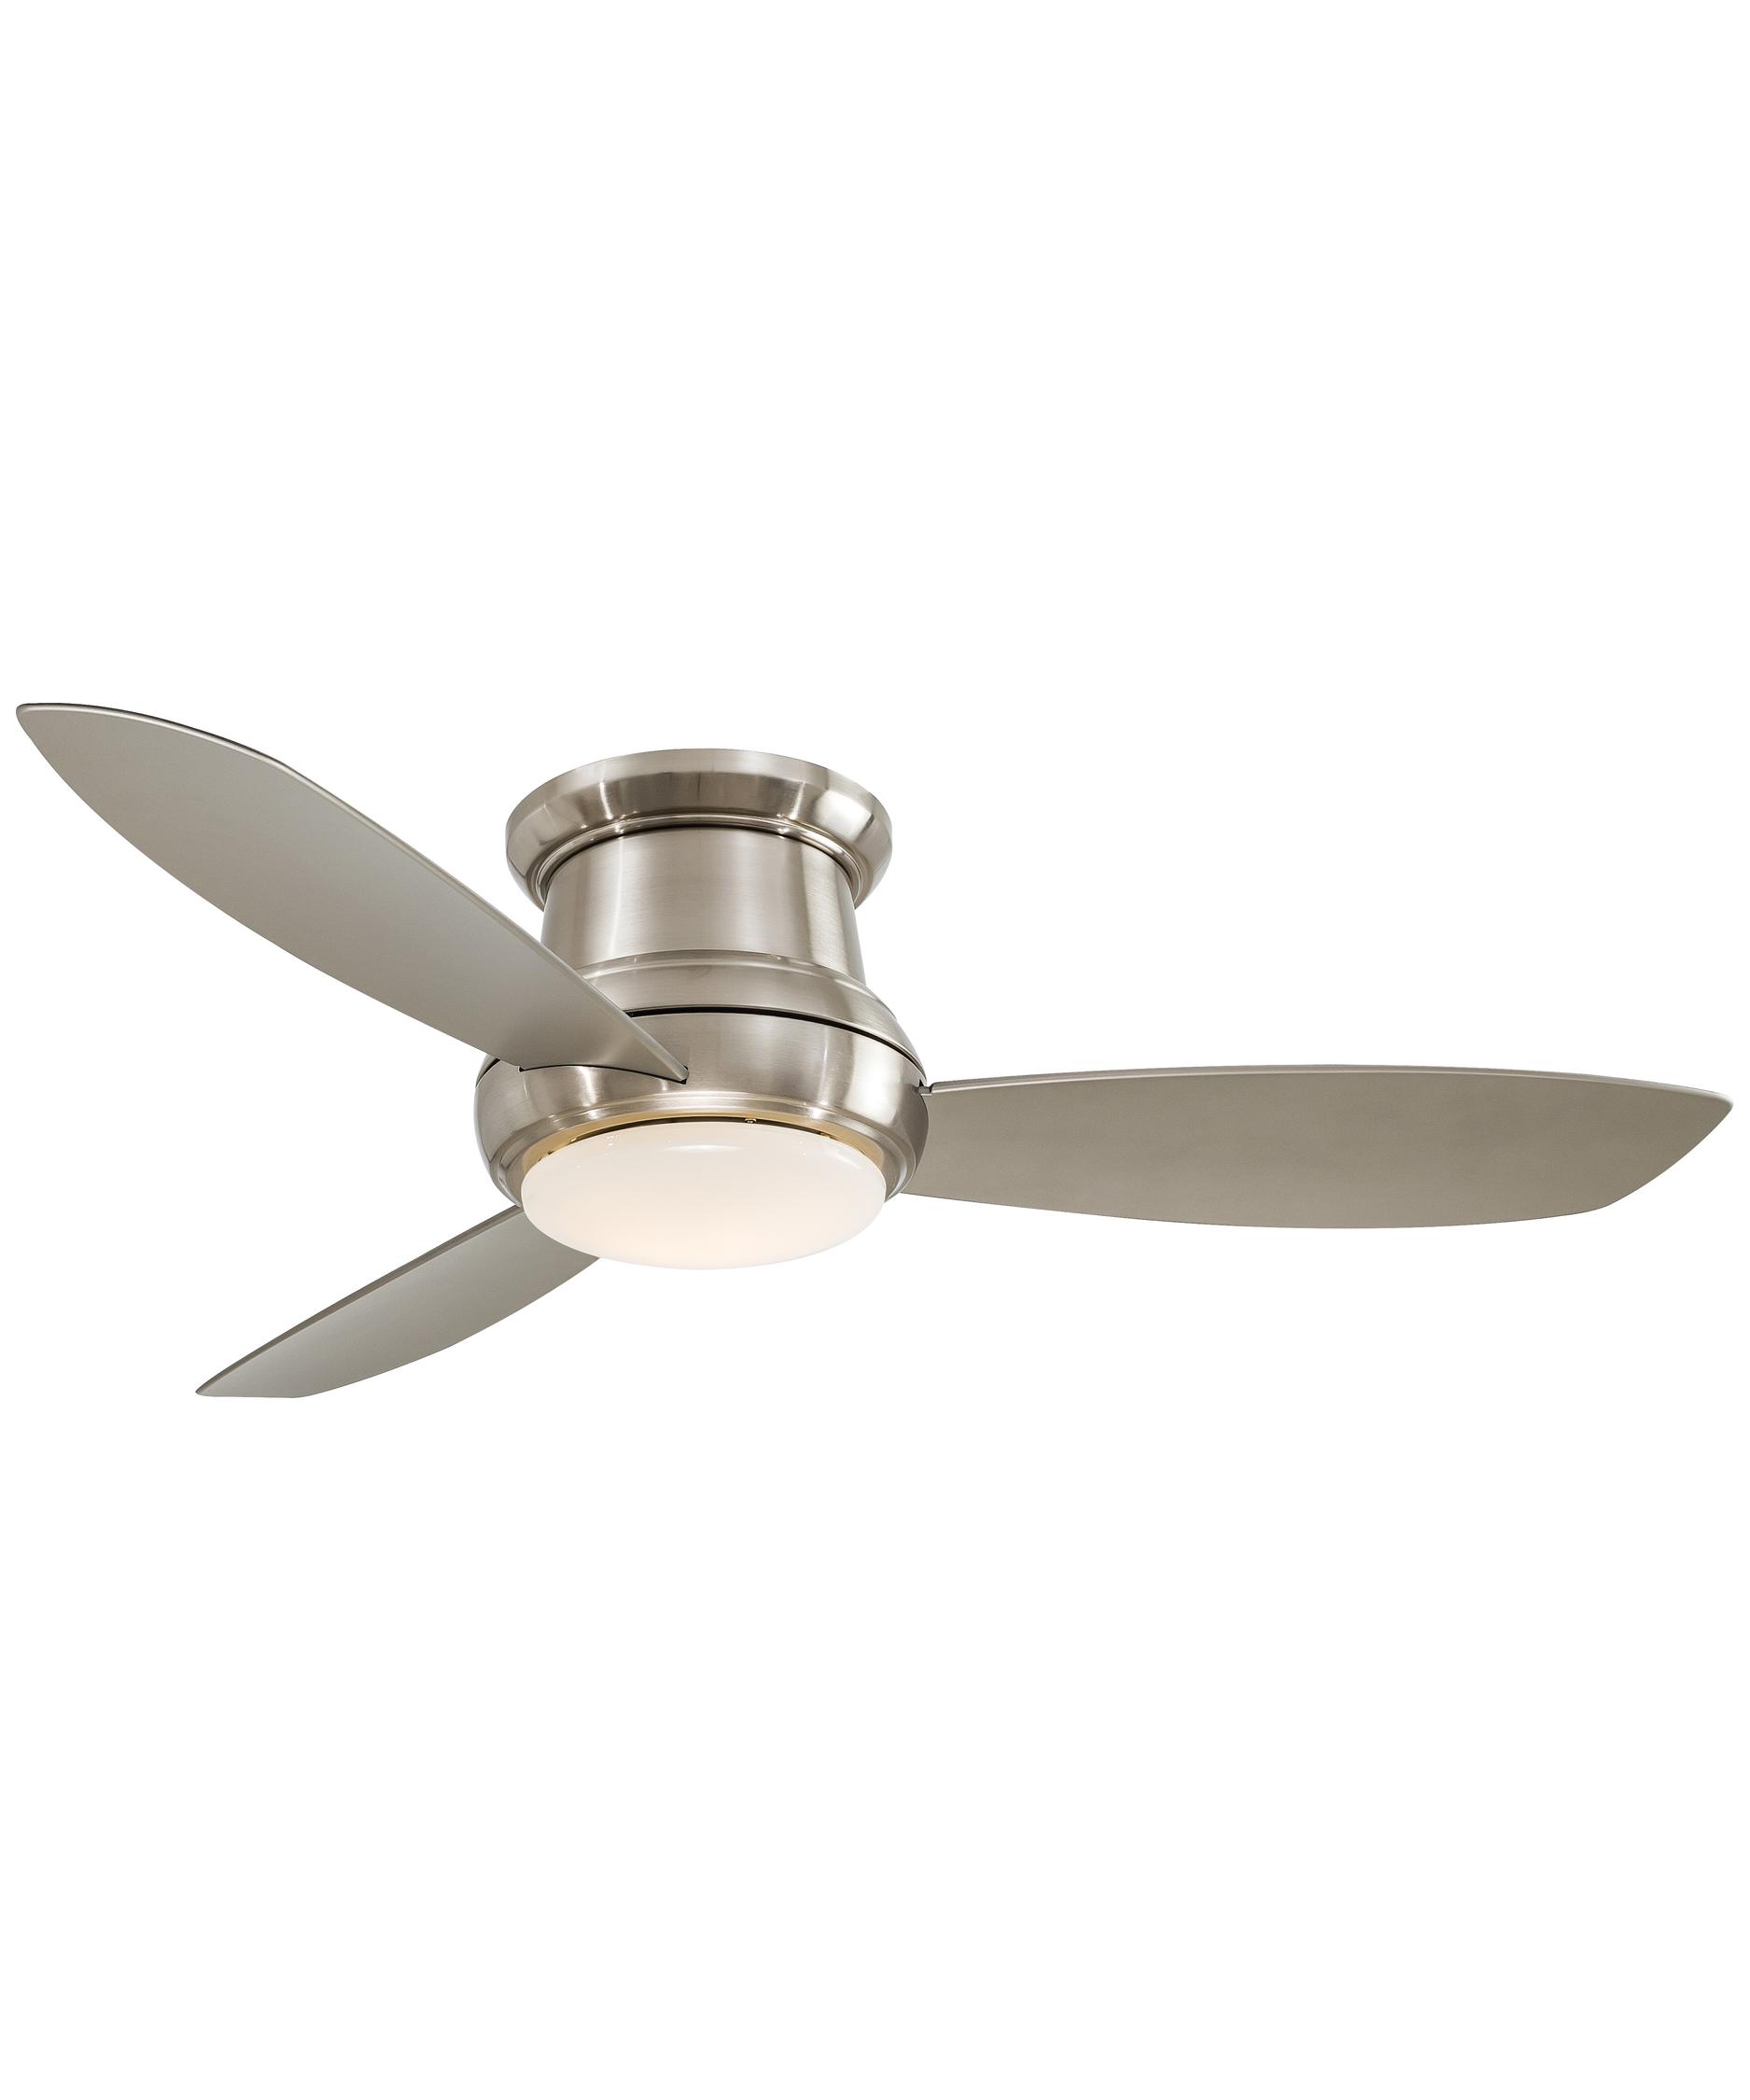 Surface mount ceiling fan - TOP 10 Ideal for Small Spaces ...